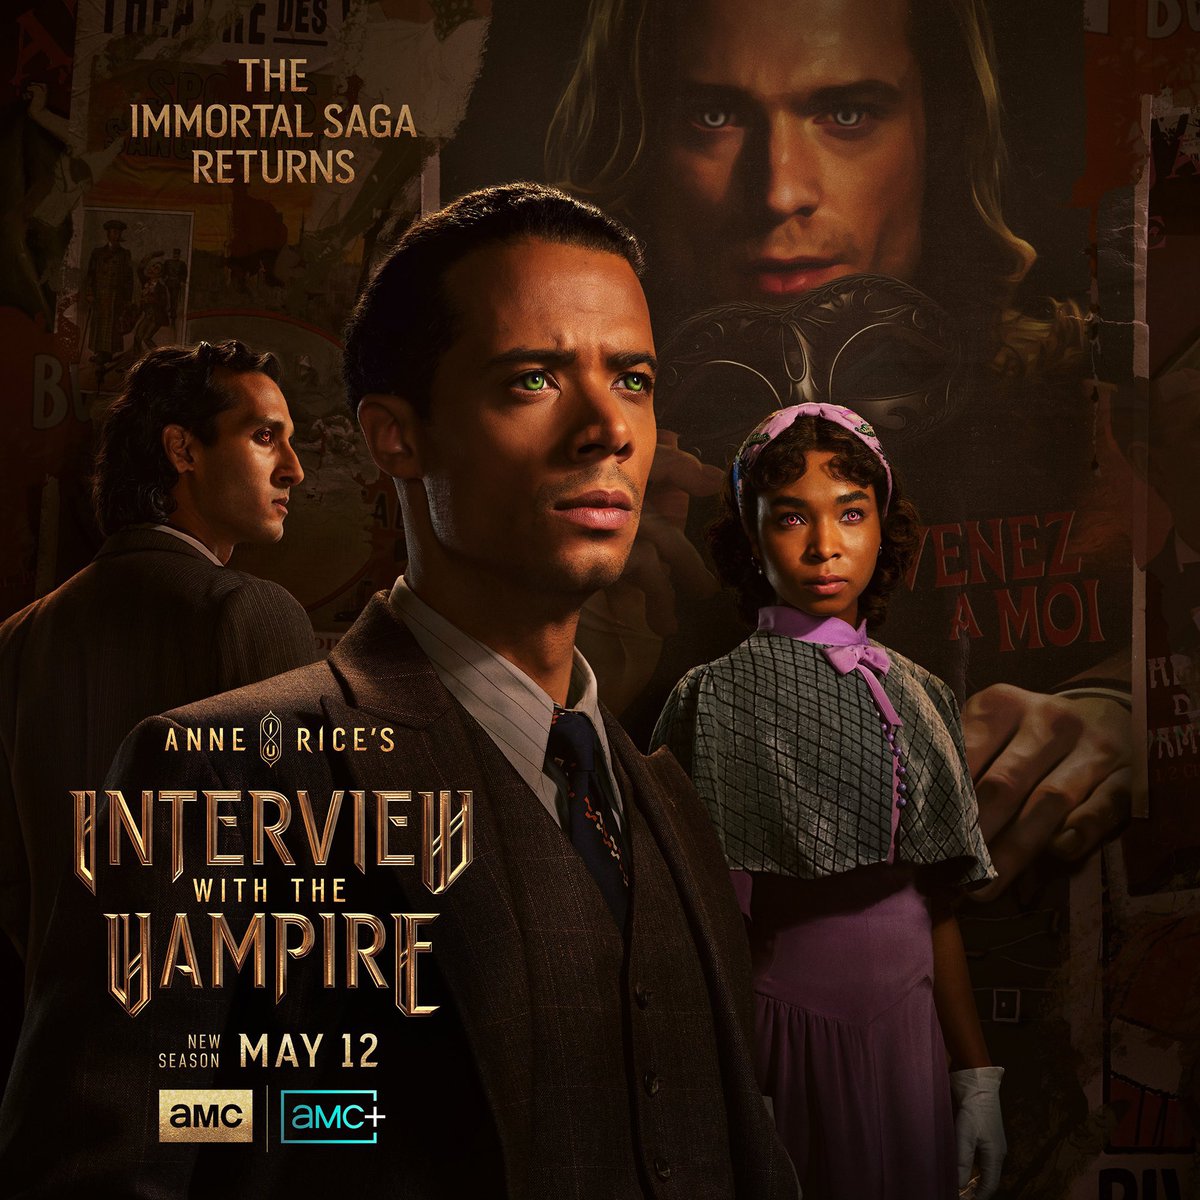 ‘INTERVIEW WITH THE VAMPIRE’ season 2 premieres today.